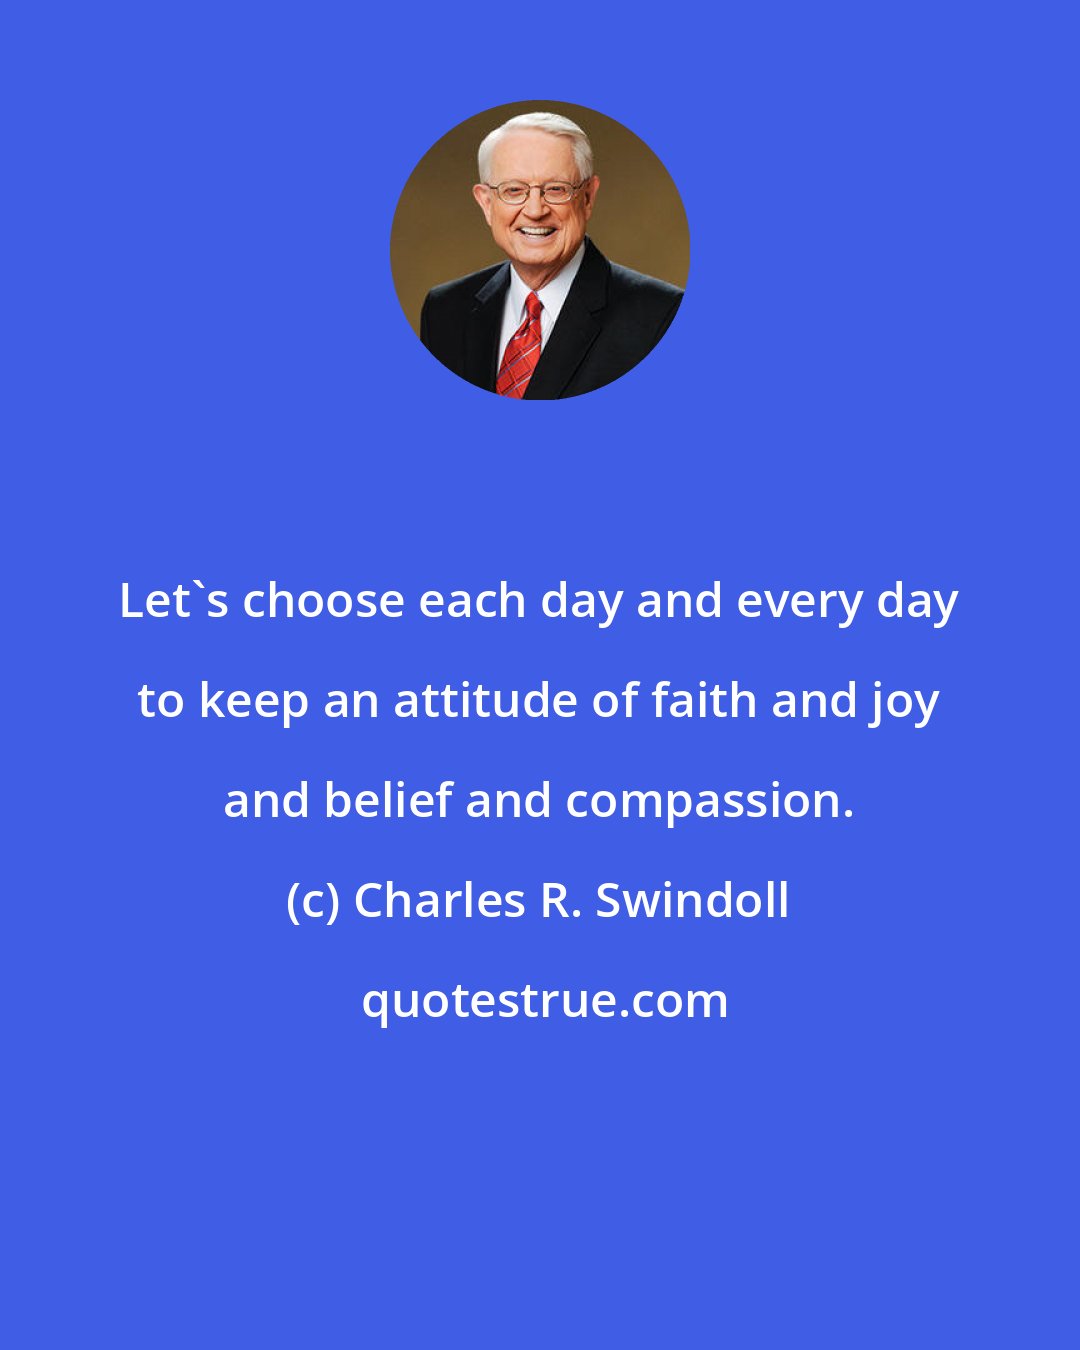 Charles R. Swindoll: Let`s choose each day and every day to keep an attitude of faith and joy and belief and compassion.